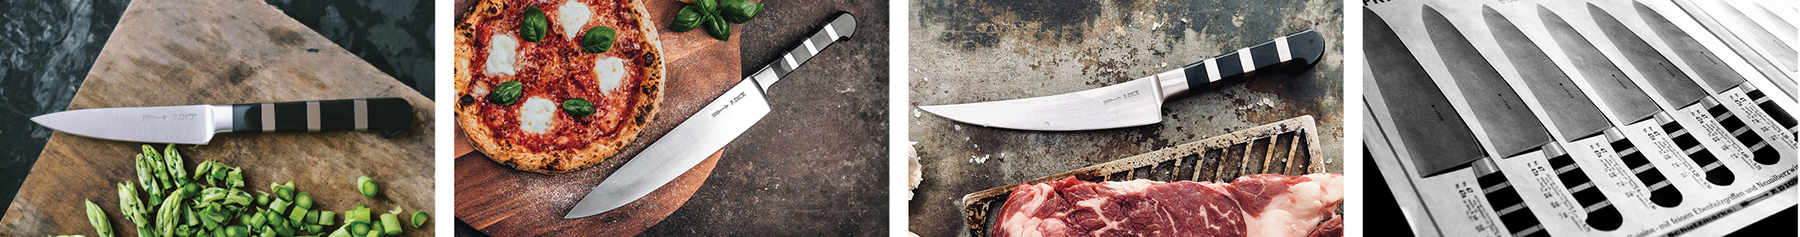 FDick 1905 series knives displayed in an image collage banner